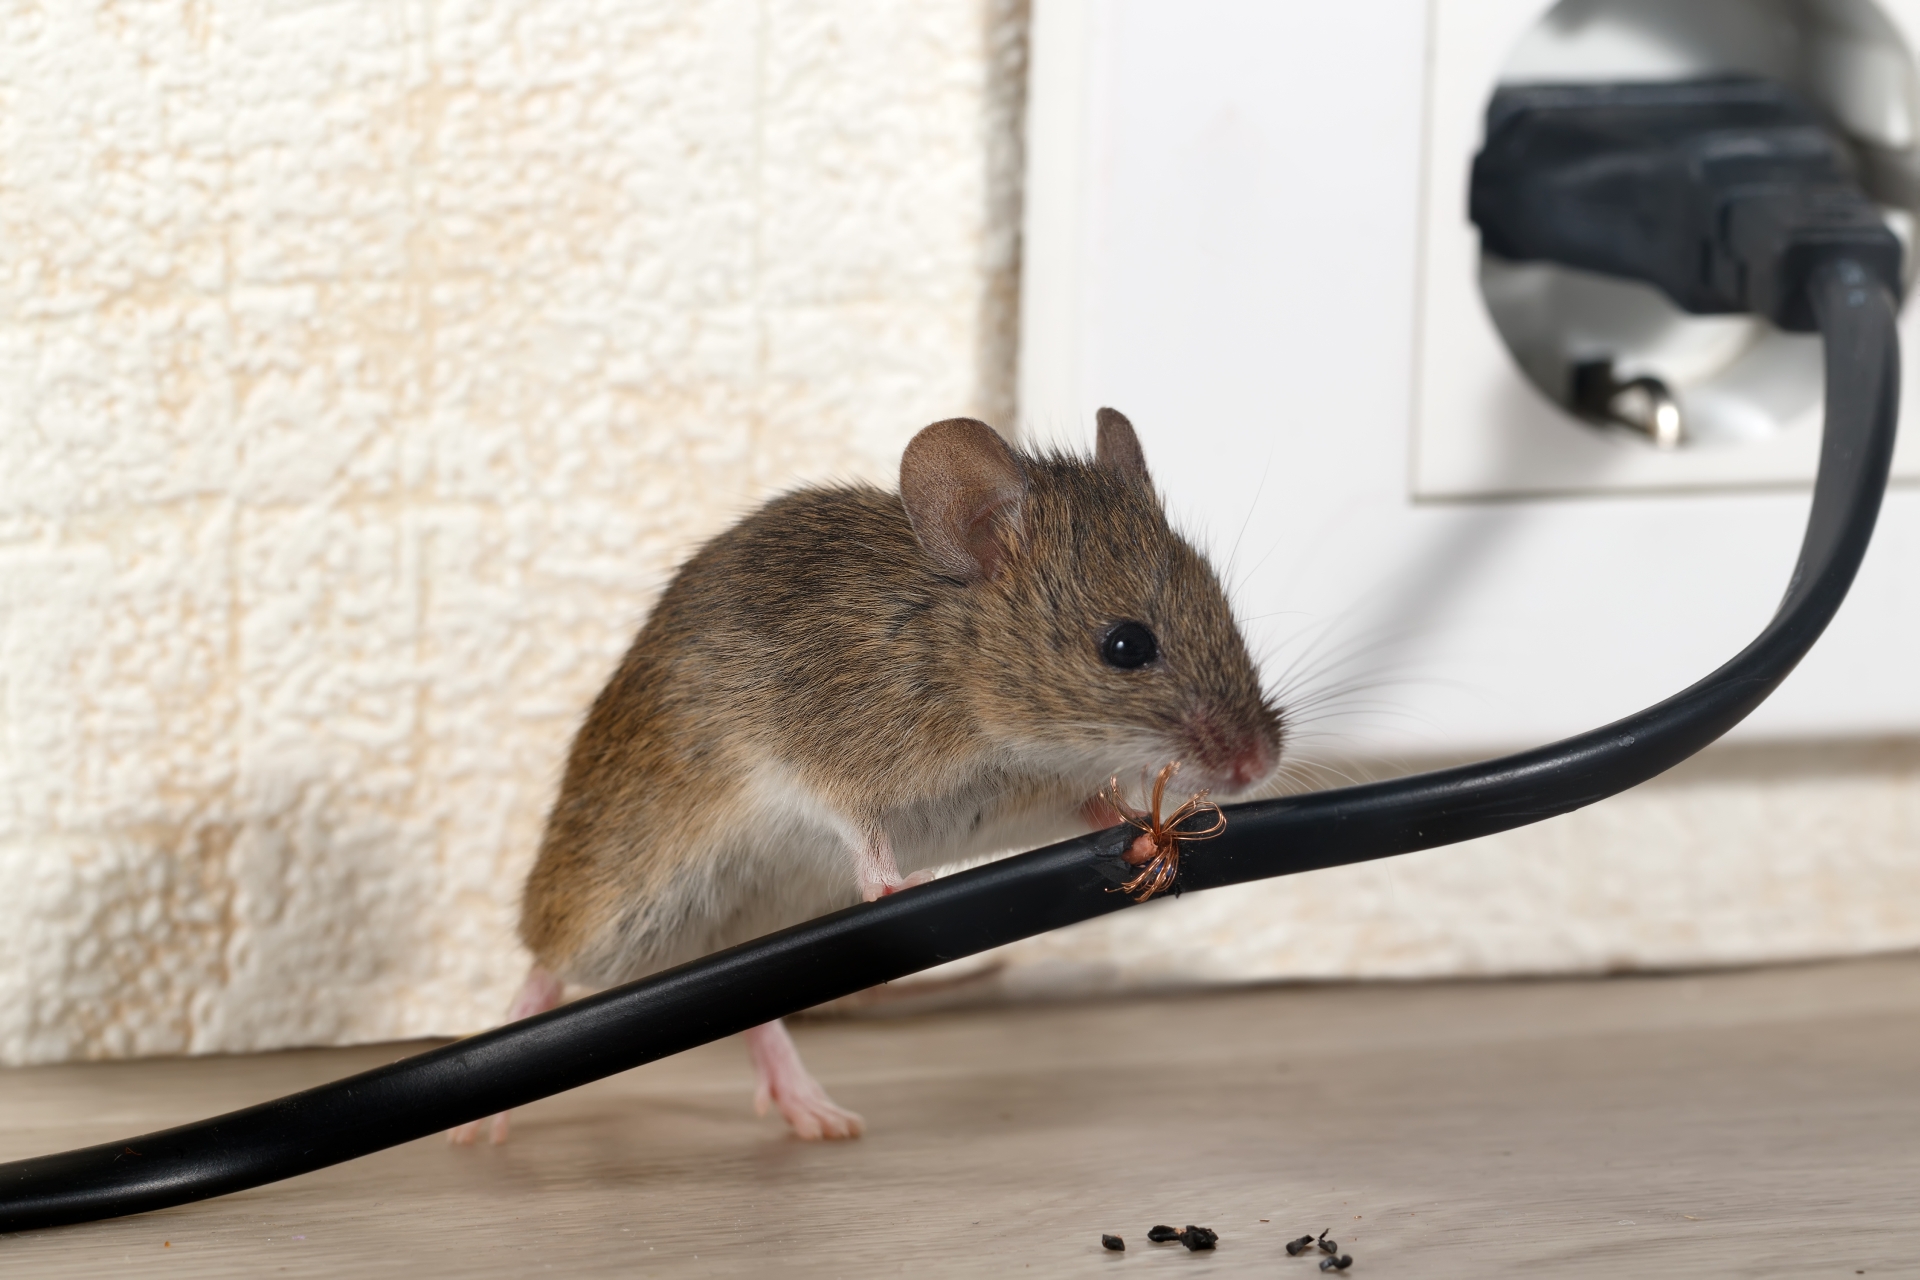 Mice Infestation, Pest Control in Barking, Creekmouth, IG11. Call Now 020 8166 9746